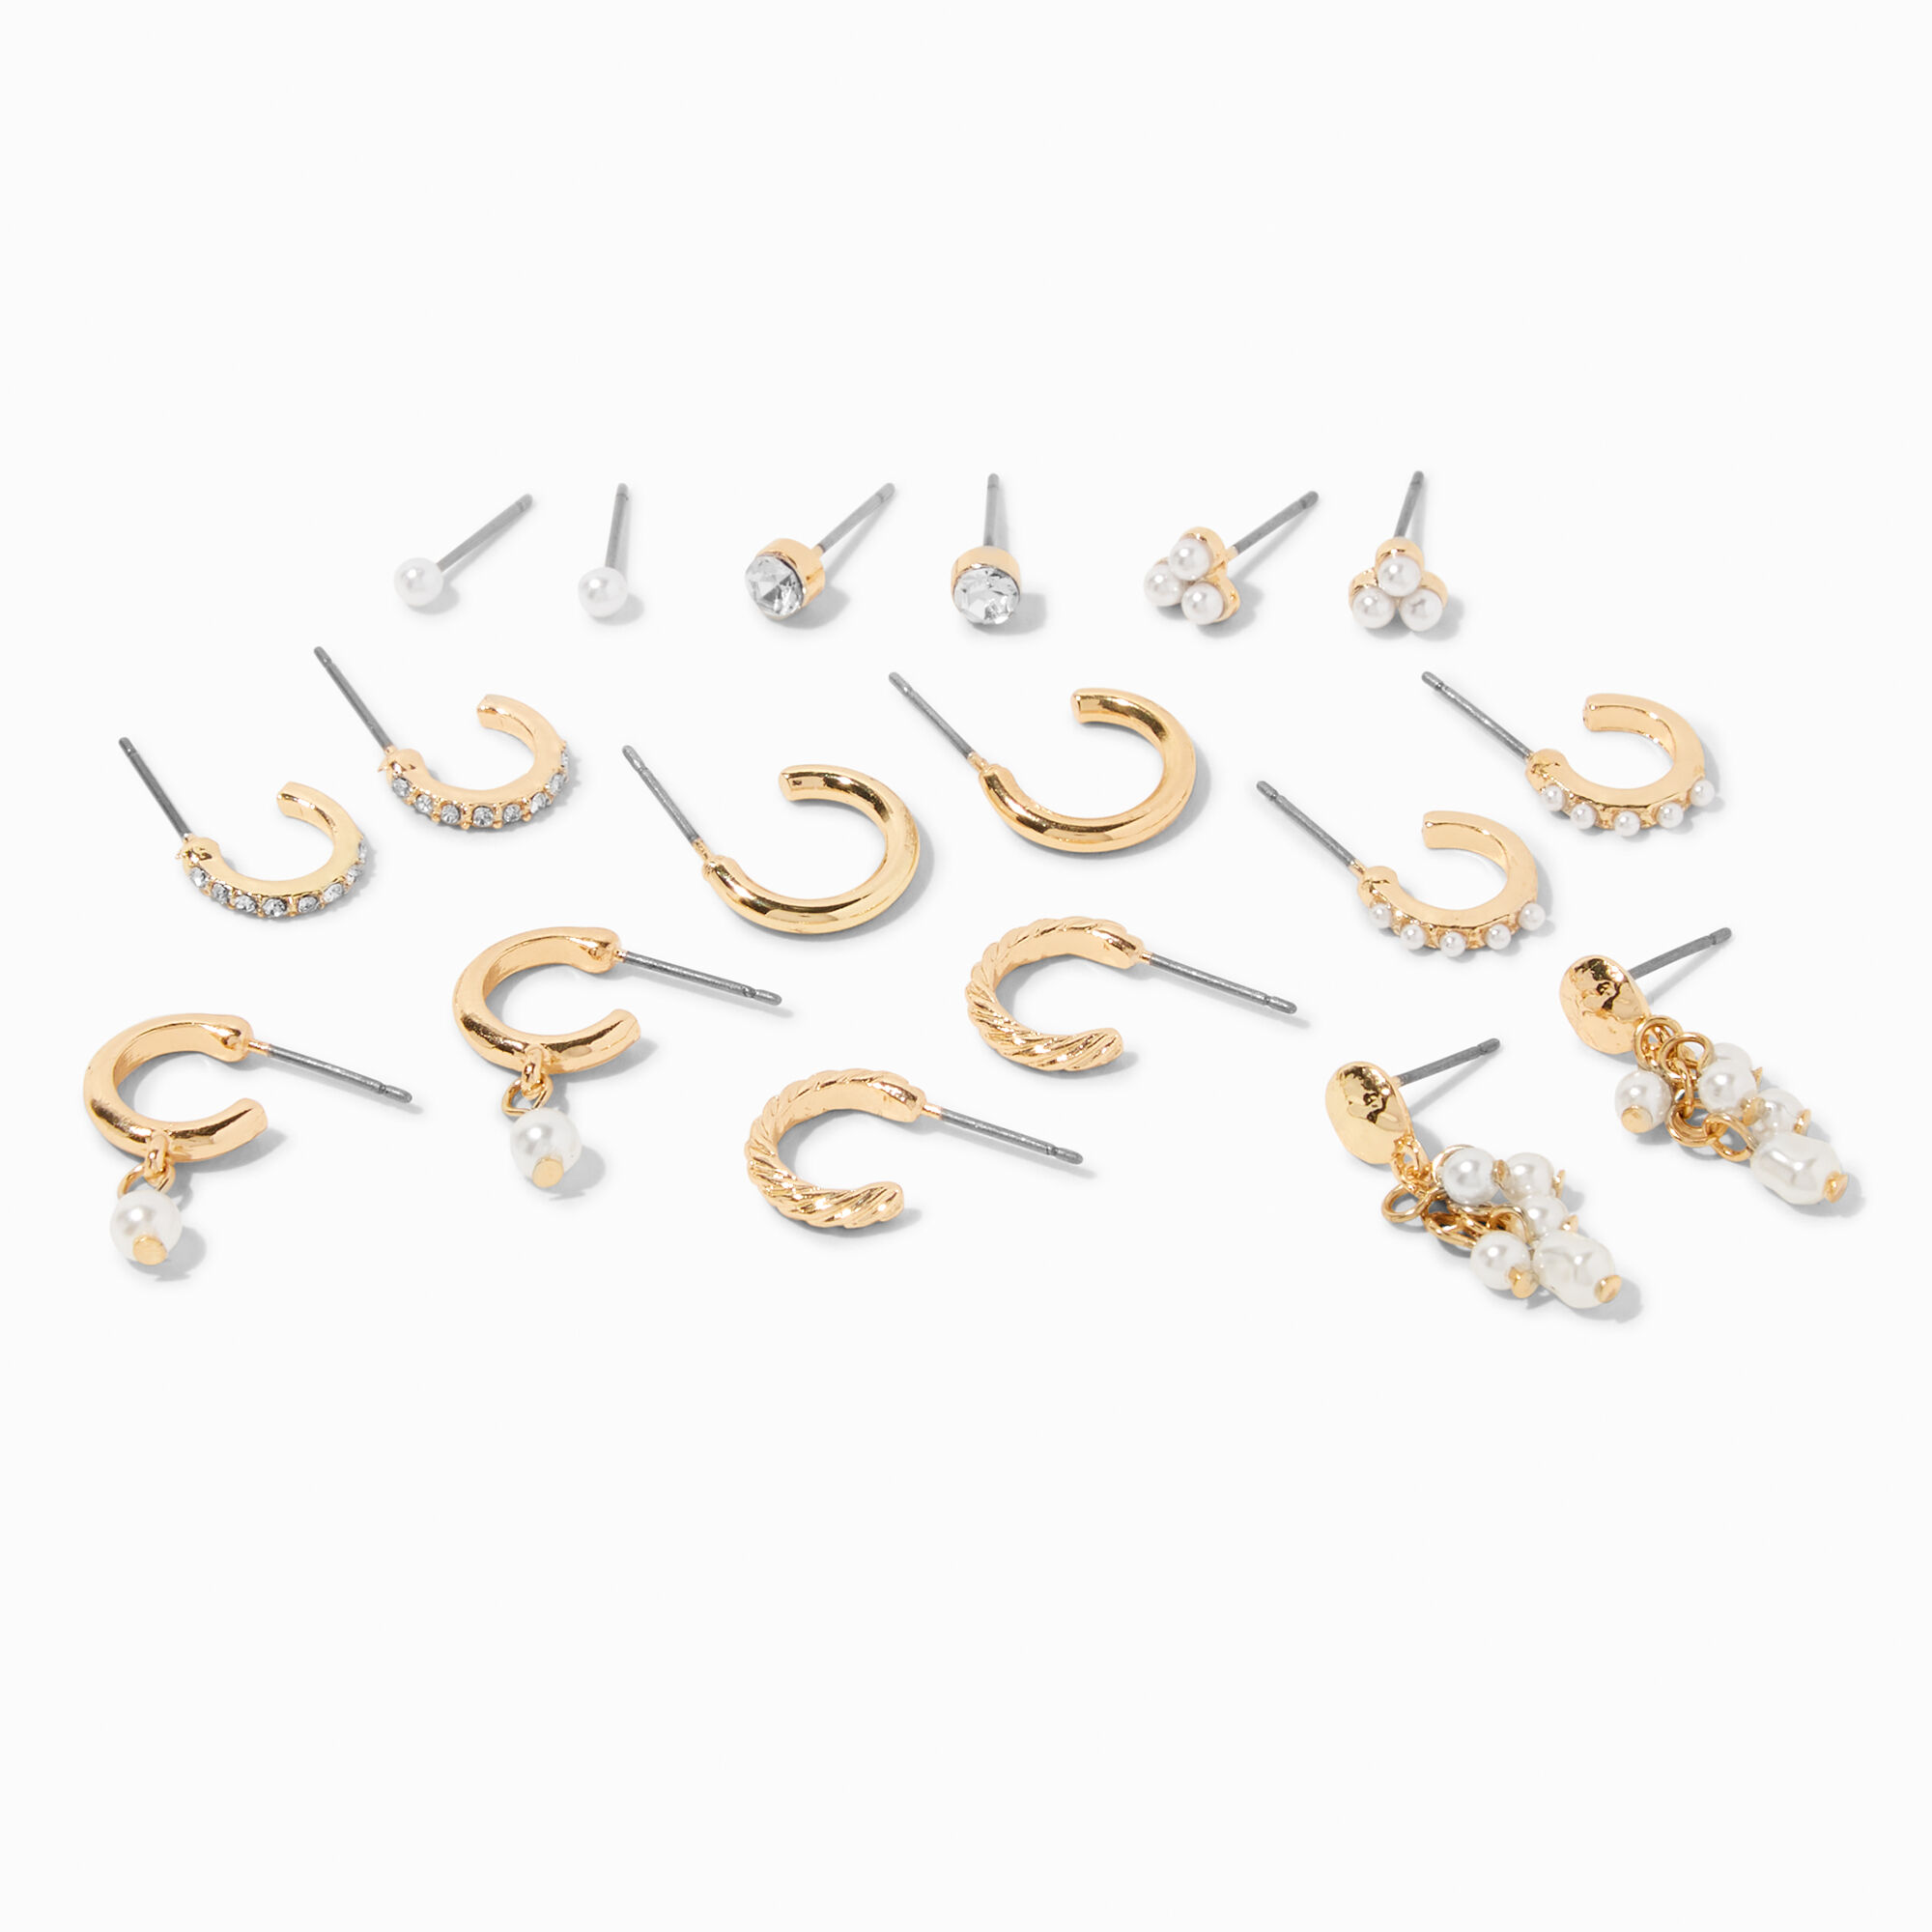 View Claires Pearl Tone Mixed Stud Hoop Earring Set 9 Pack Gold information